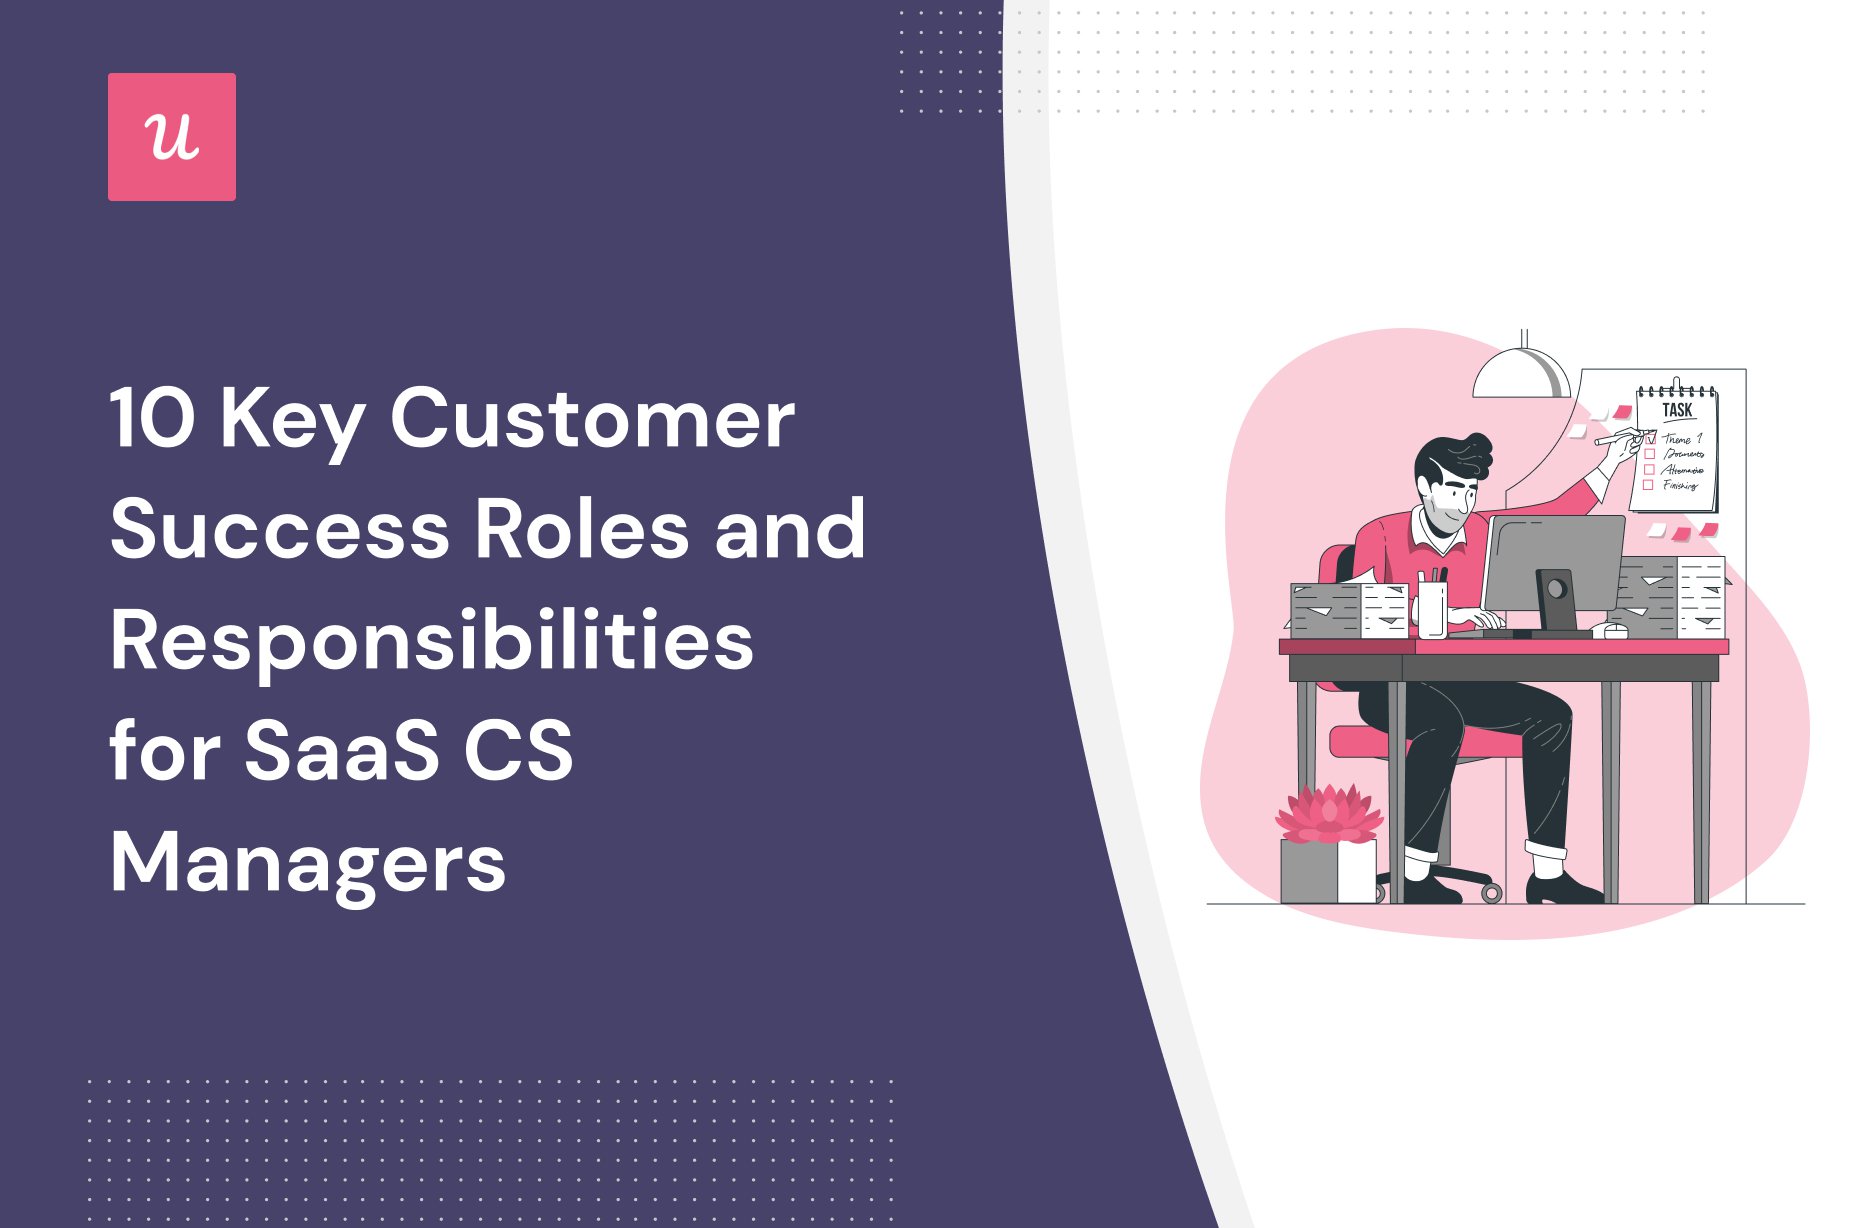 10 Key Customer Success Roles and Responsibilities for SaaS CS Managers cover